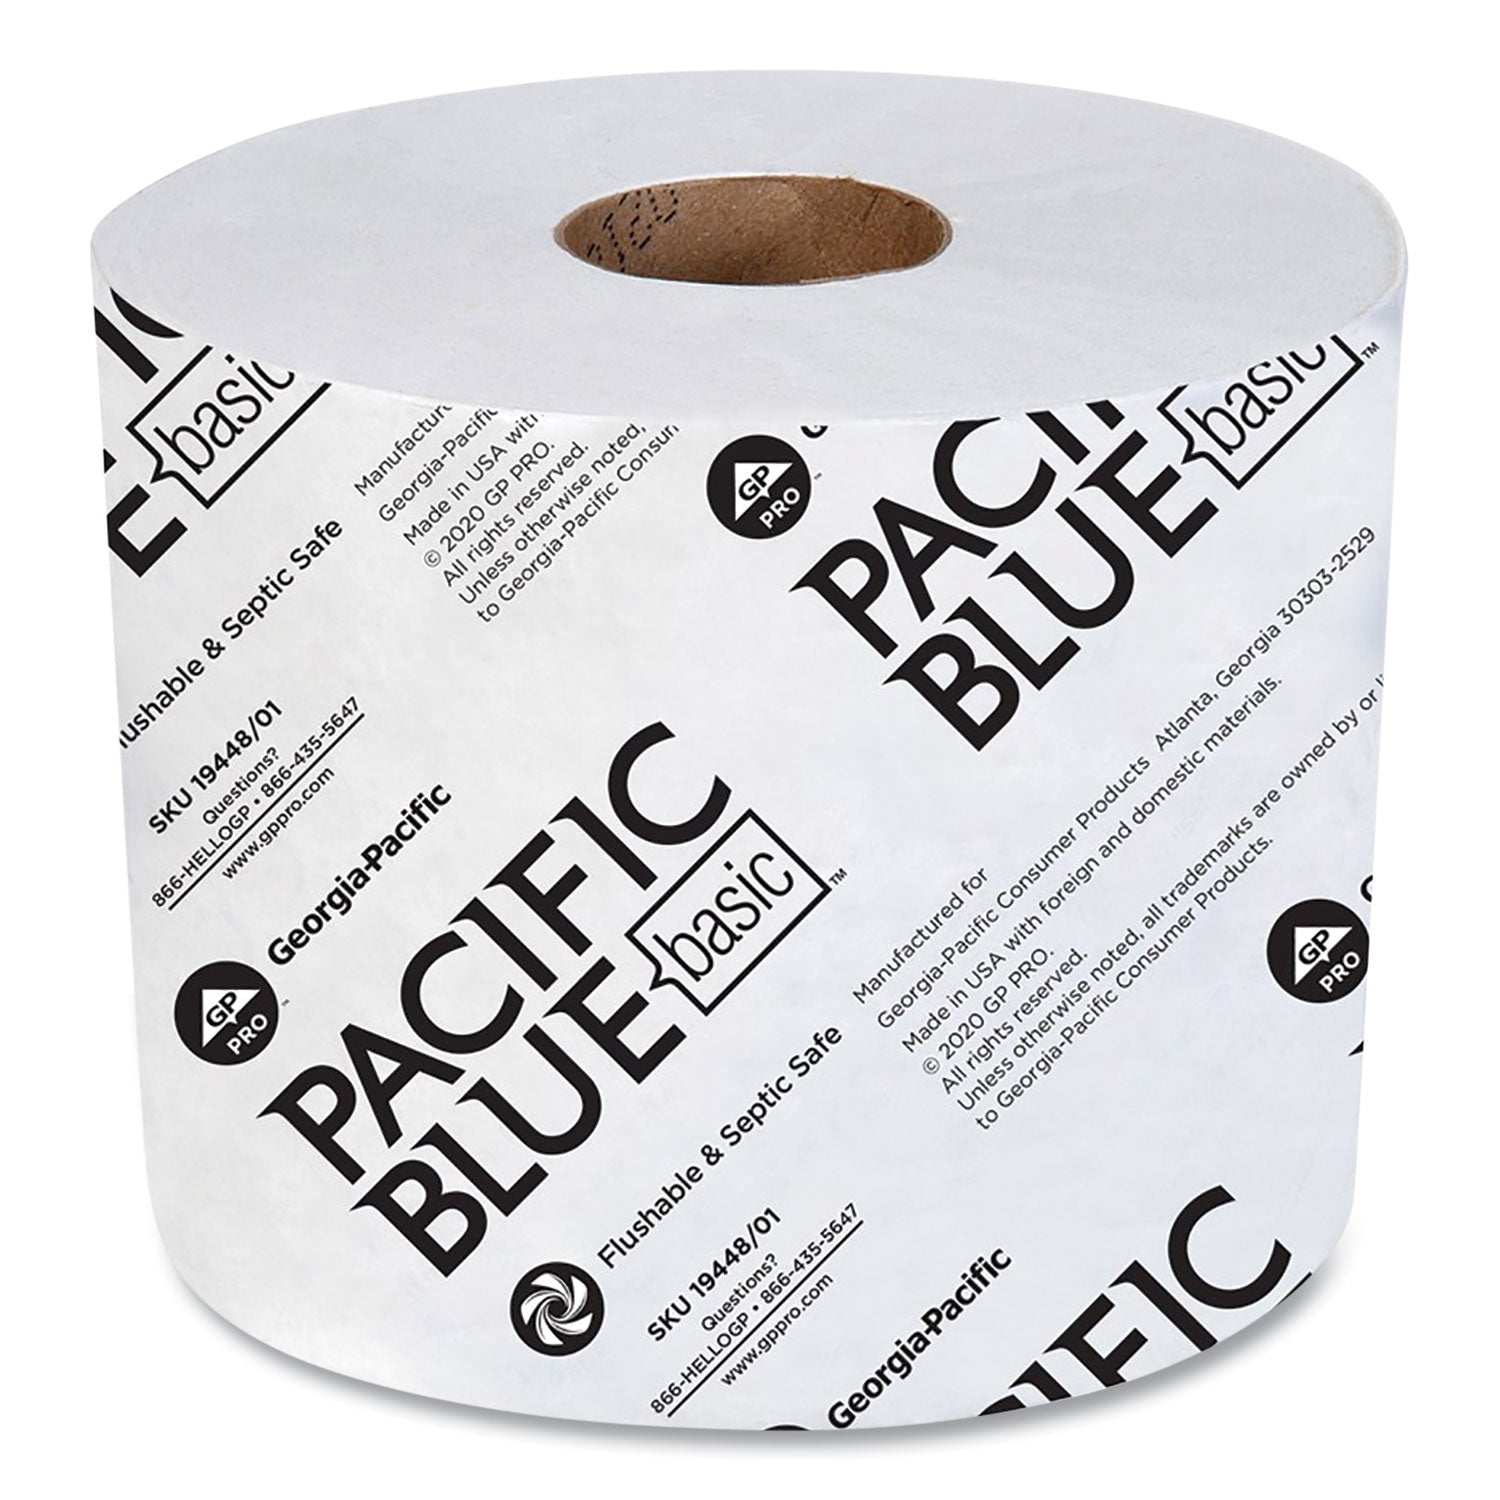 Pacific Blue Basic High-Capacity Bathroom Tissue, Septic Safe, 2-Ply, White, 1,000 Sheets/Roll, 48 Rolls/Carton - 